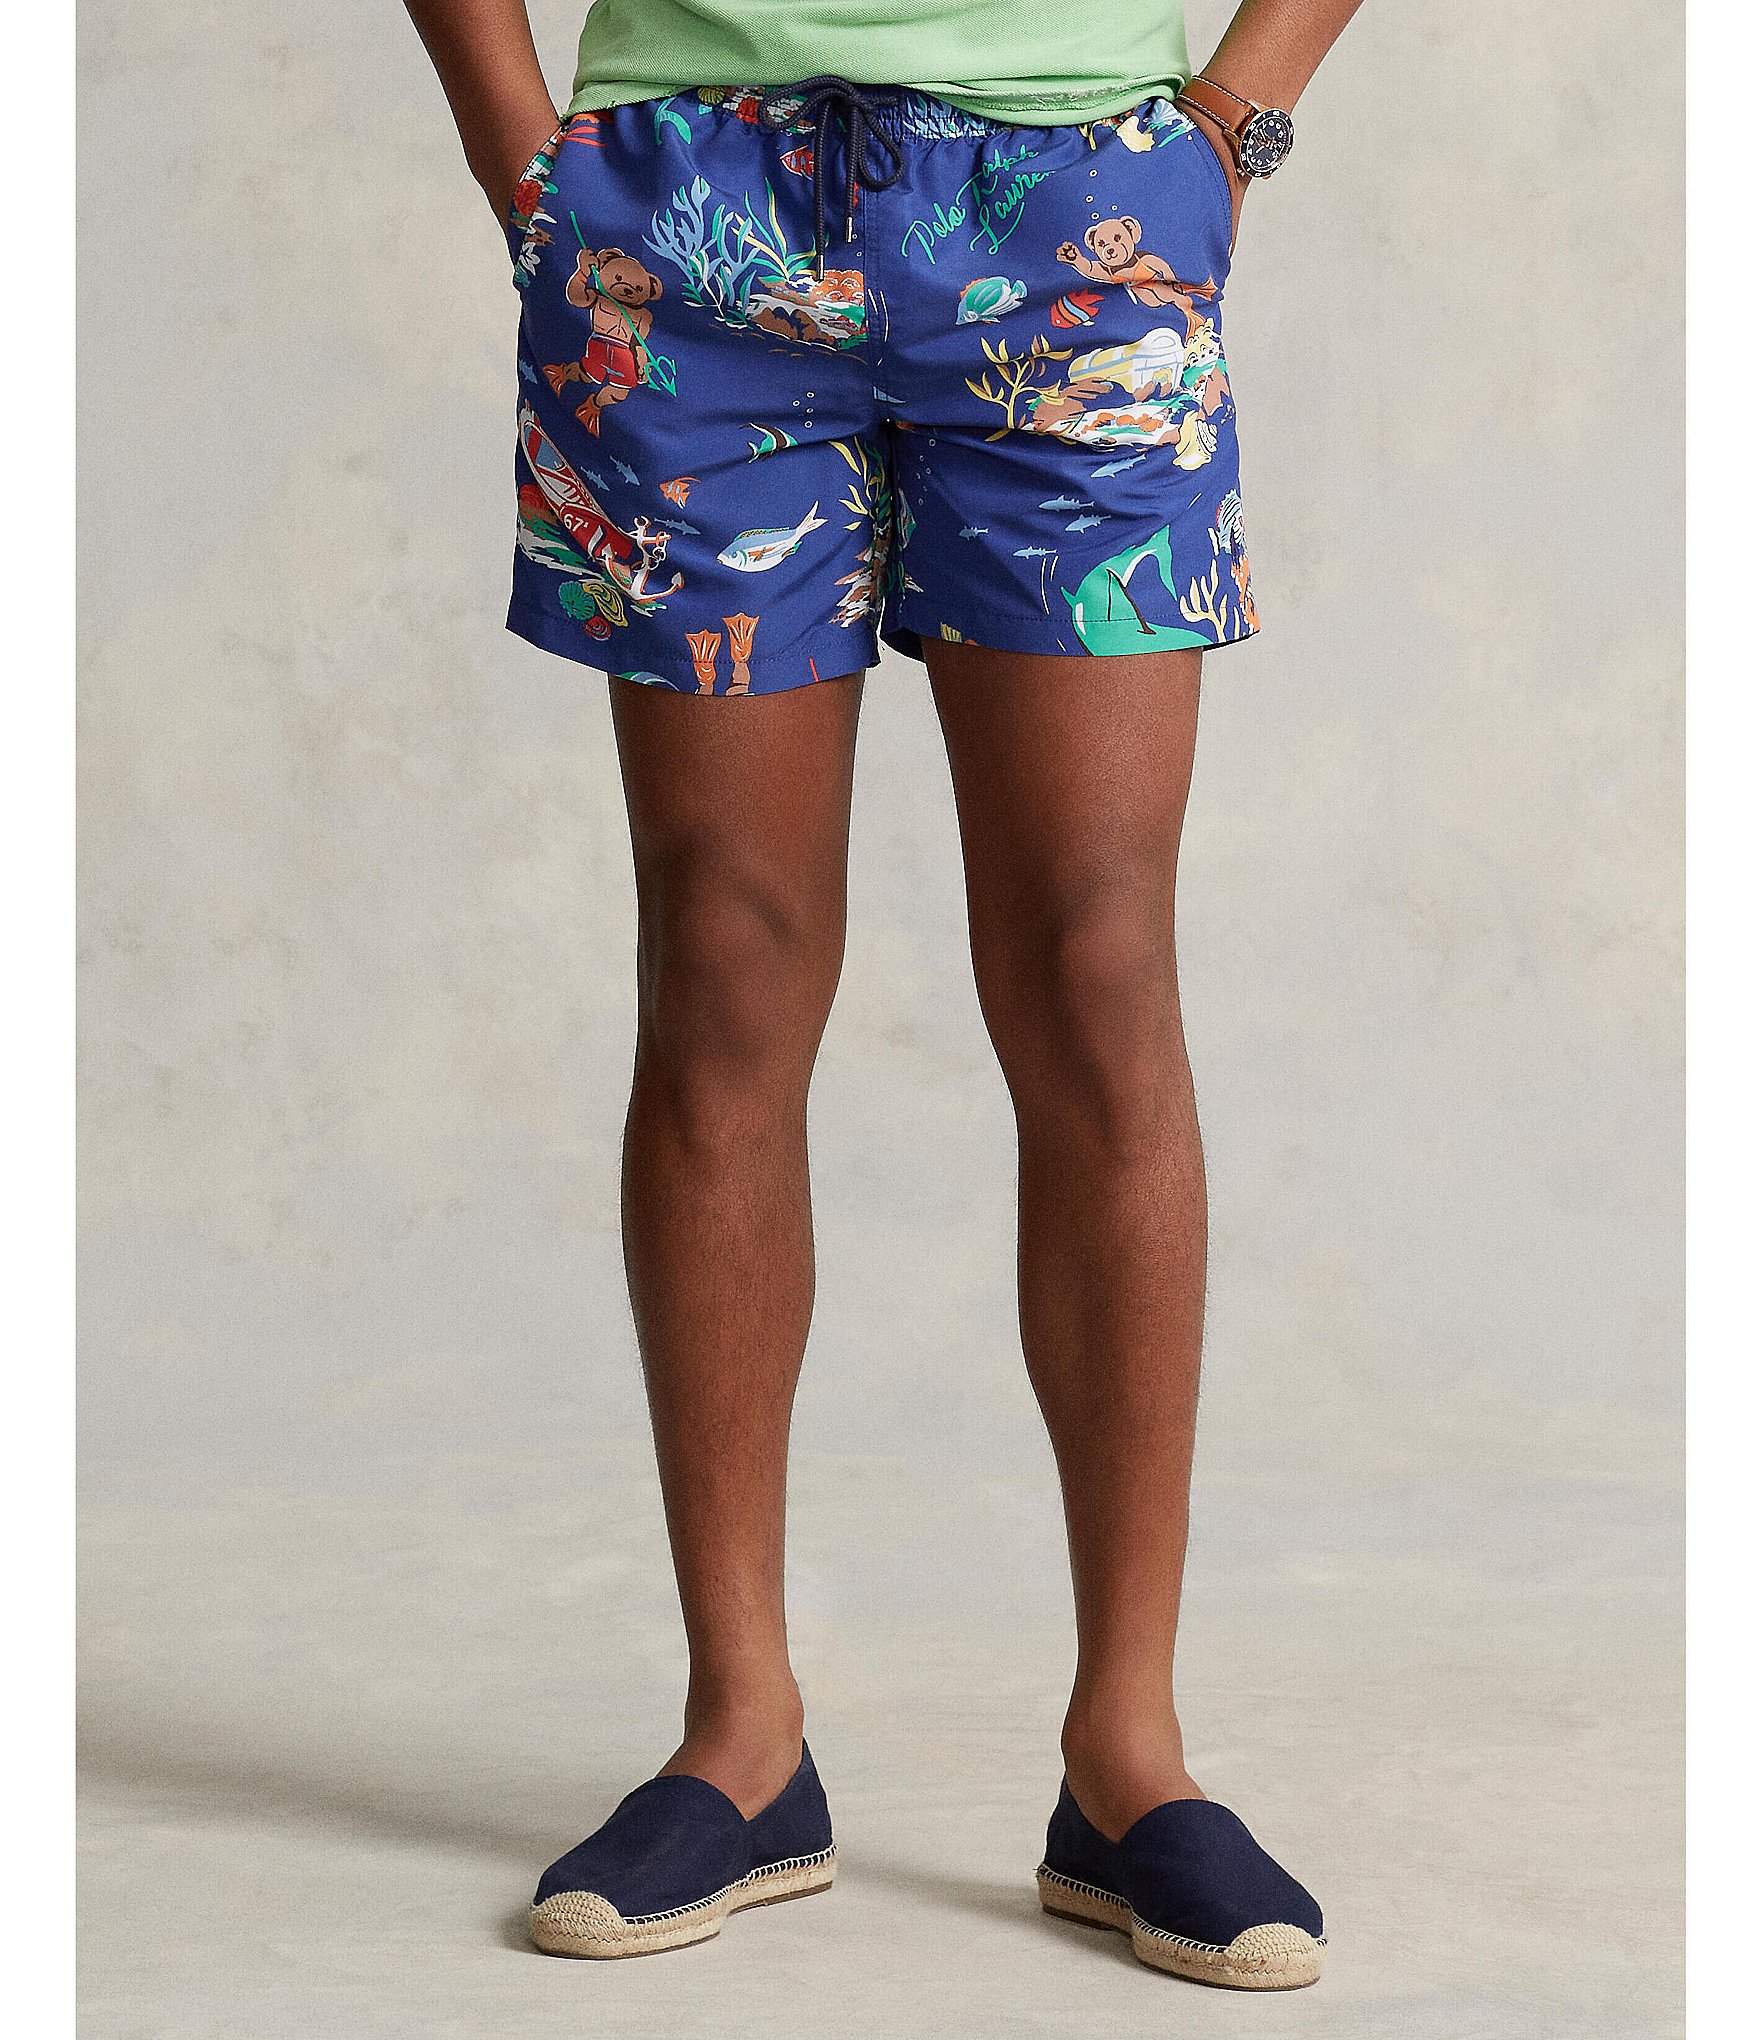 Polo Ralph Lauren woven shorts in blue with all over tennis bear